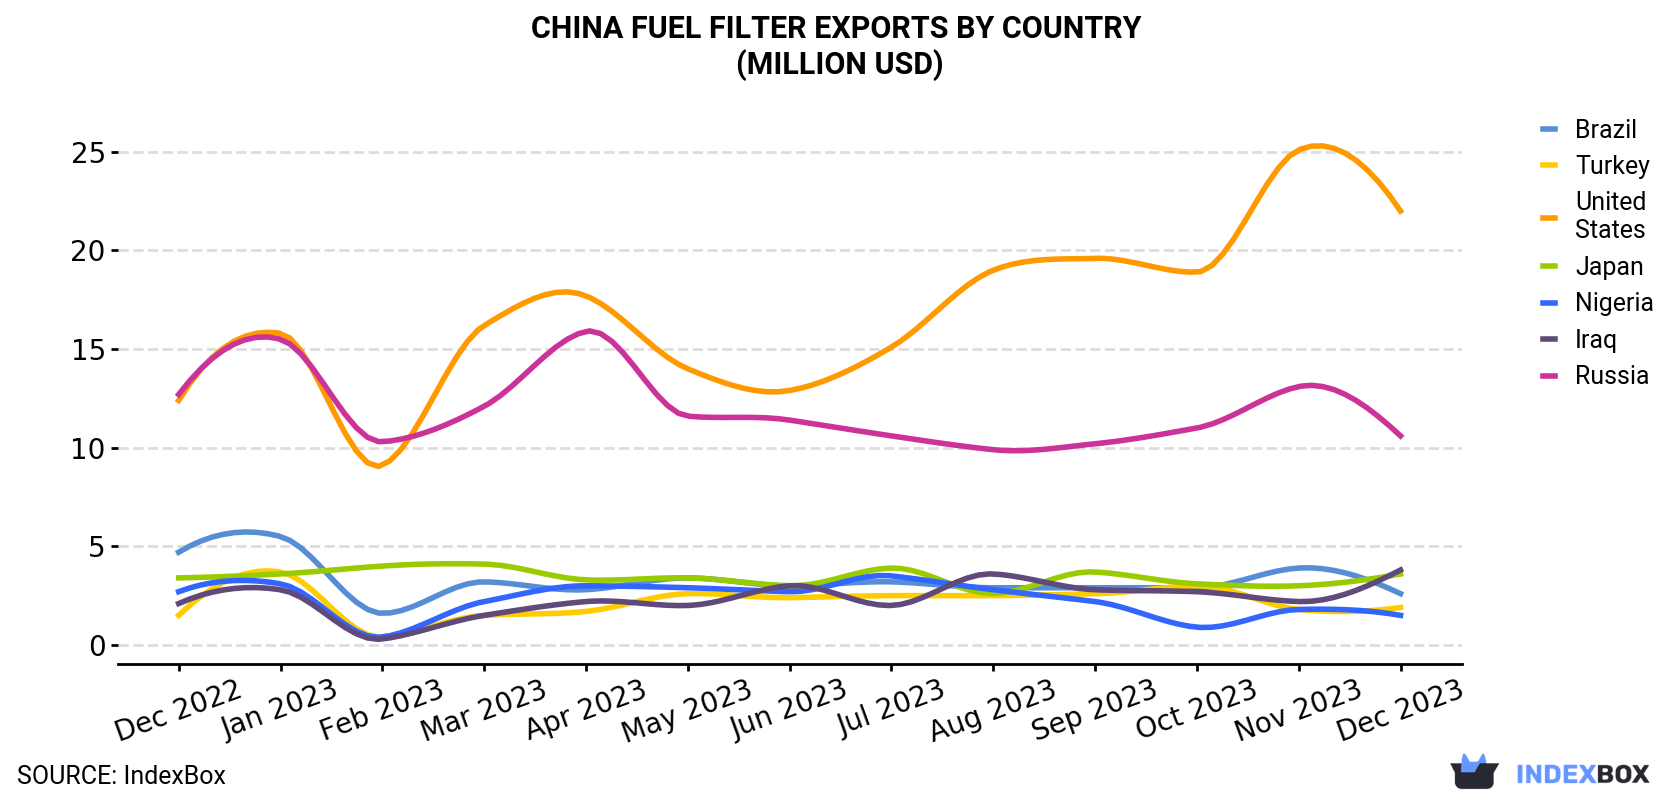 China Fuel Filter Exports By Country (Million USD)